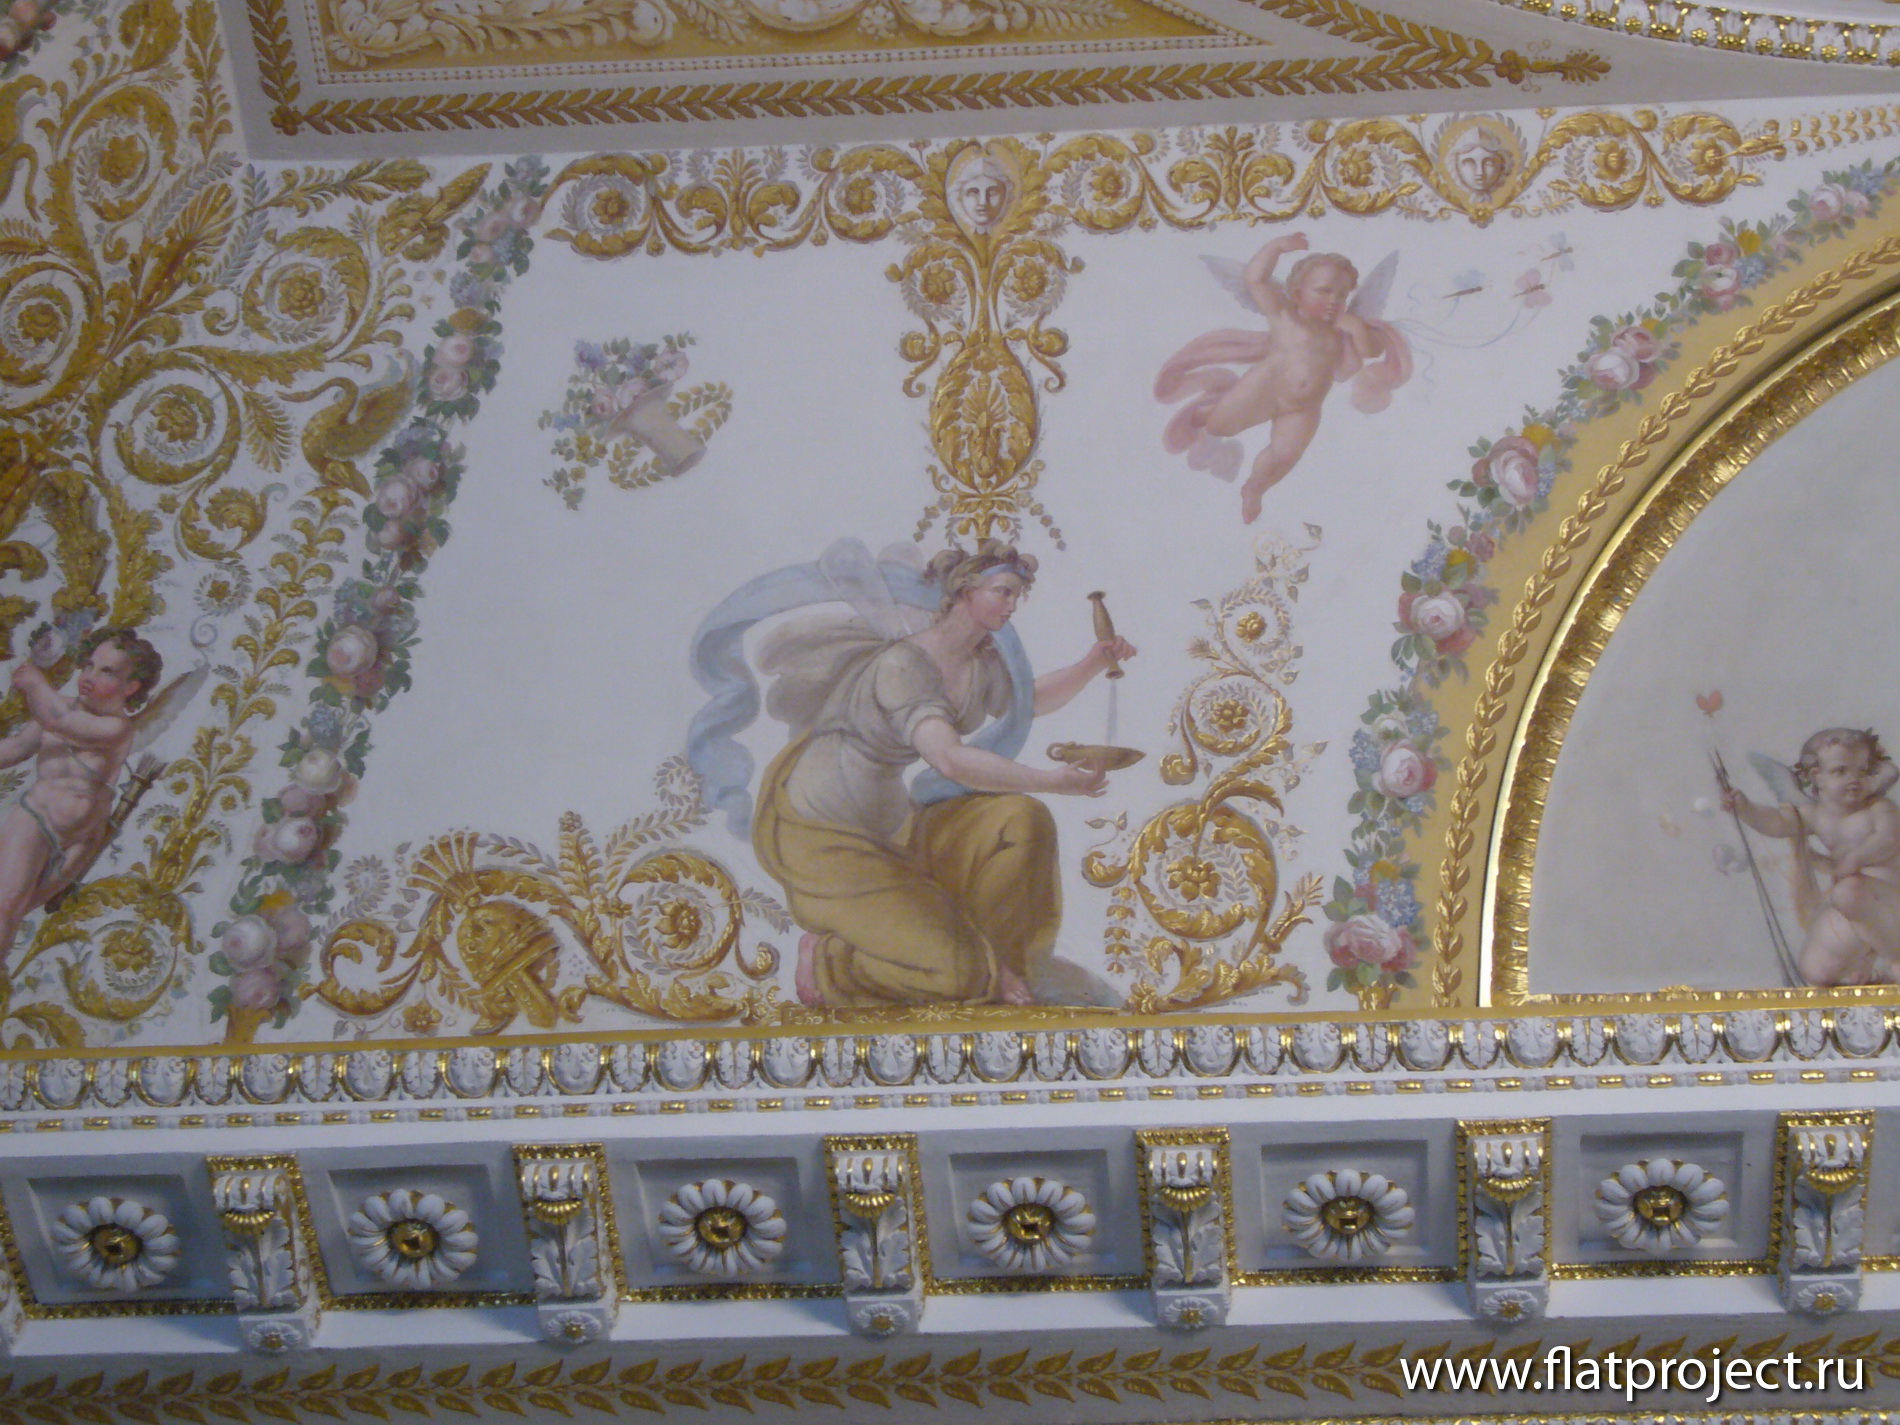 The State Russian museum interiors – photo 55